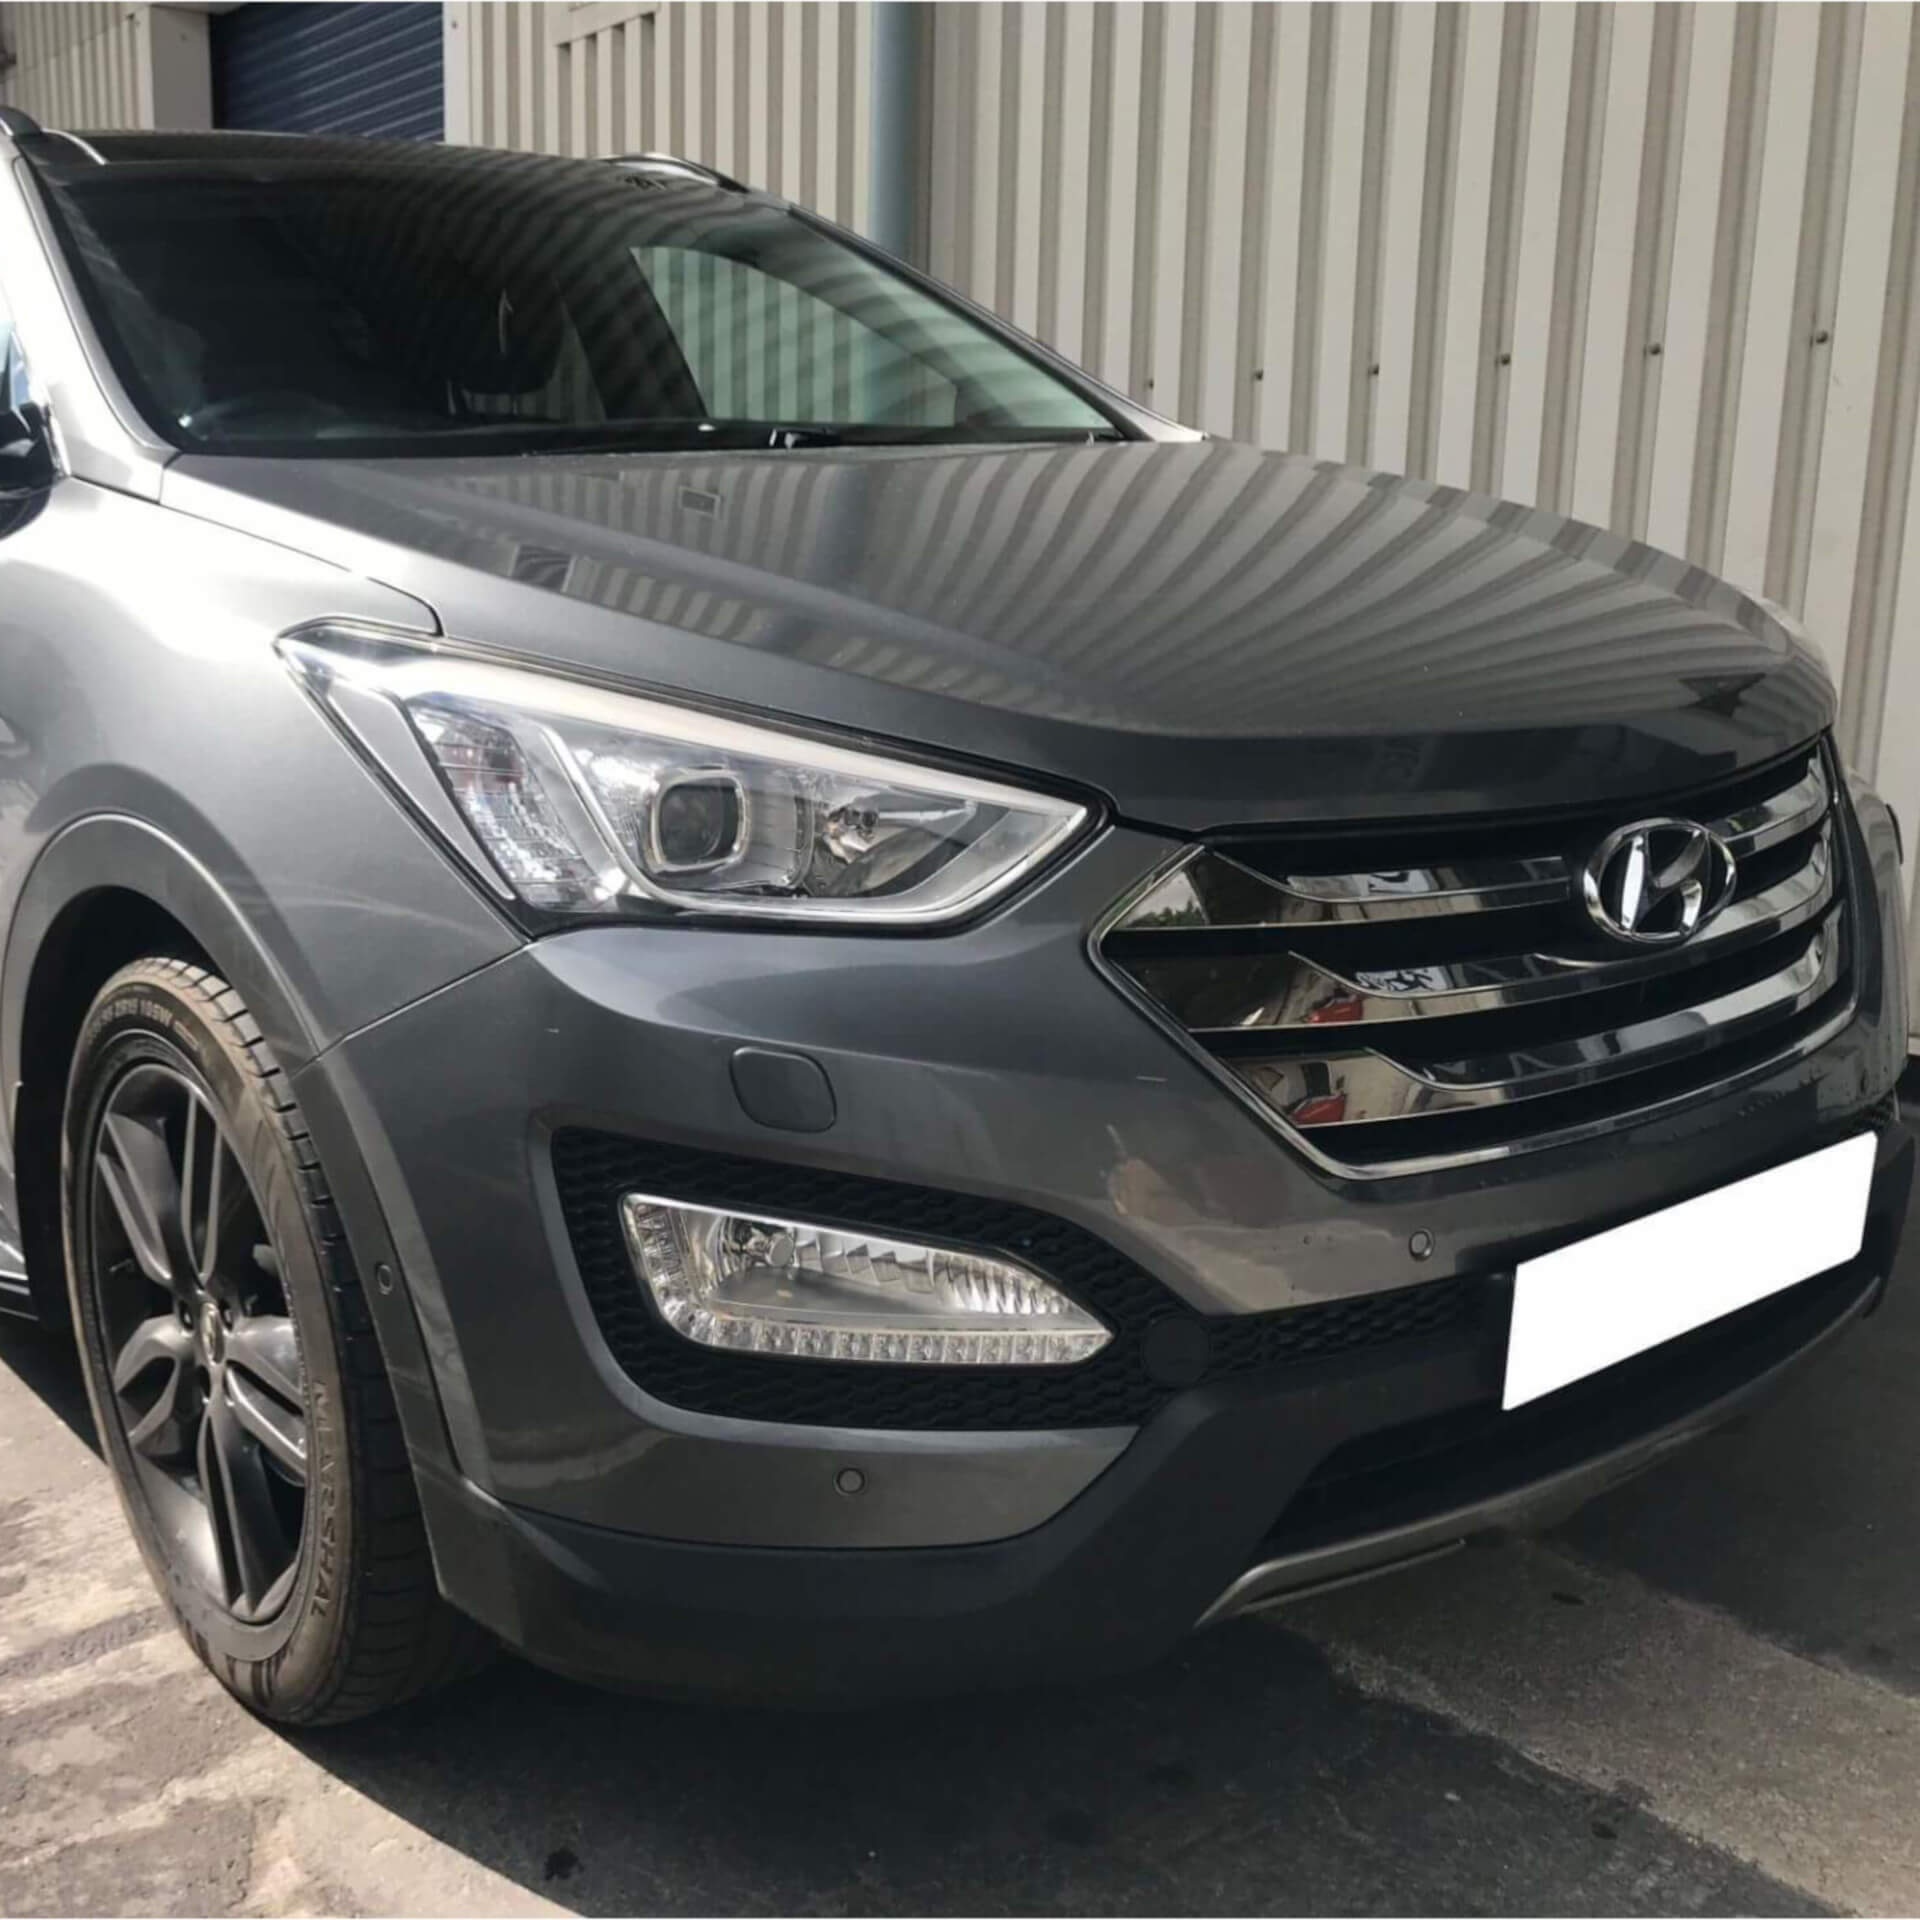 Direct4x4 accessories for Hyundai Santa Fe vehicles with a photo of a grey Hyundai Santa Fe outside our offices